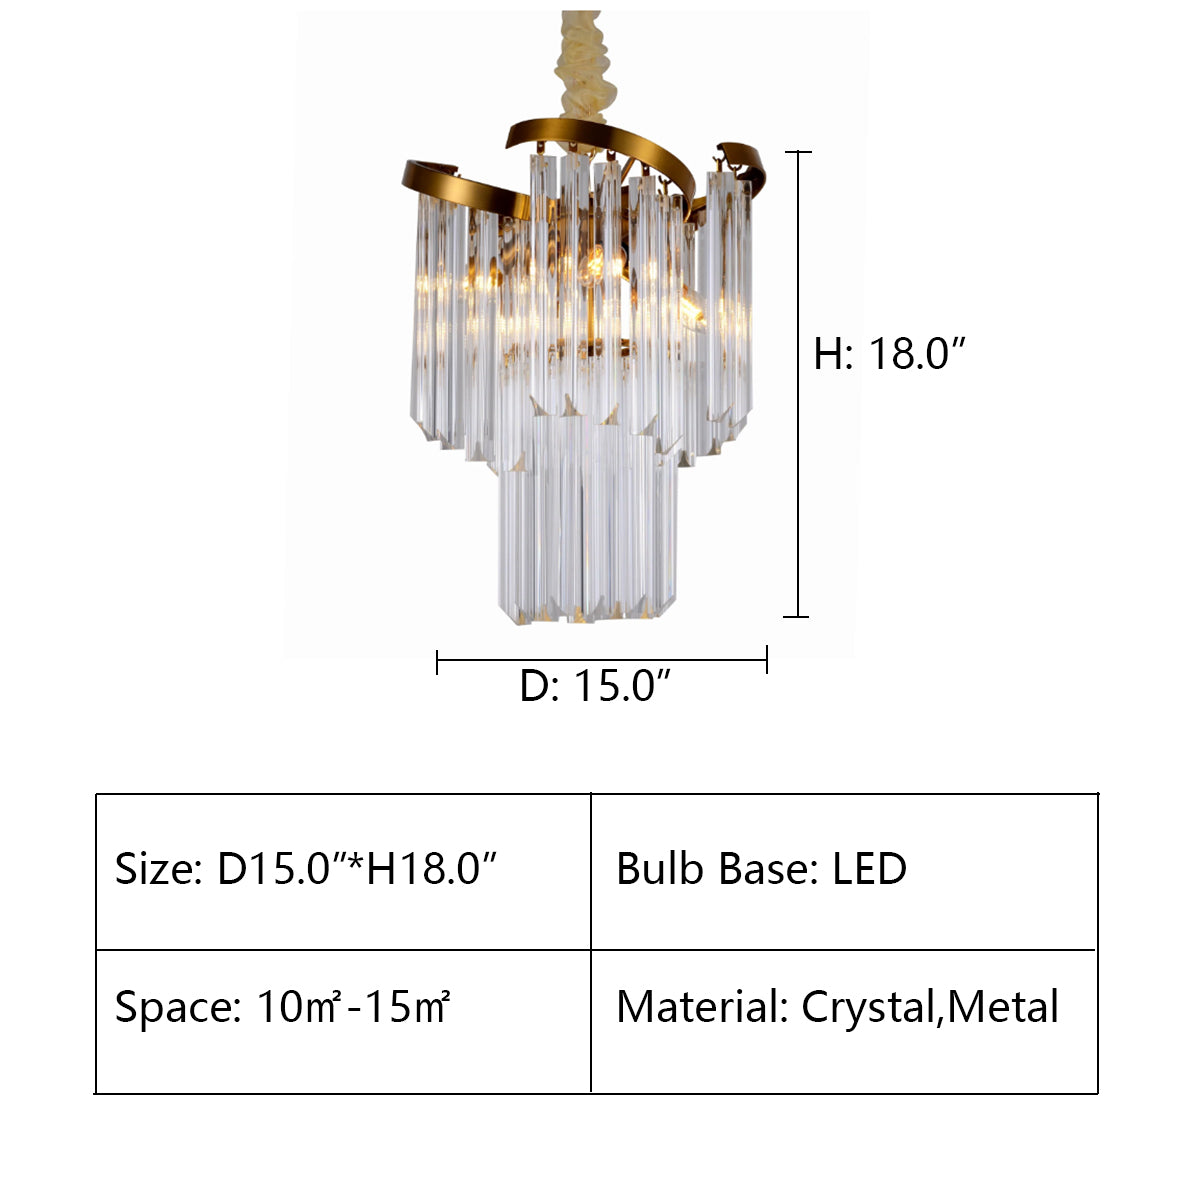 D15.0"*H18.0" TWIN PALMS ROUND CRYSTAL CHANDELIER,chandelier,chandeliers,pendant,ceiling,crystal,spiral,tiers,layers,multi-tier,multi-layer,living room,dining room,bedroom